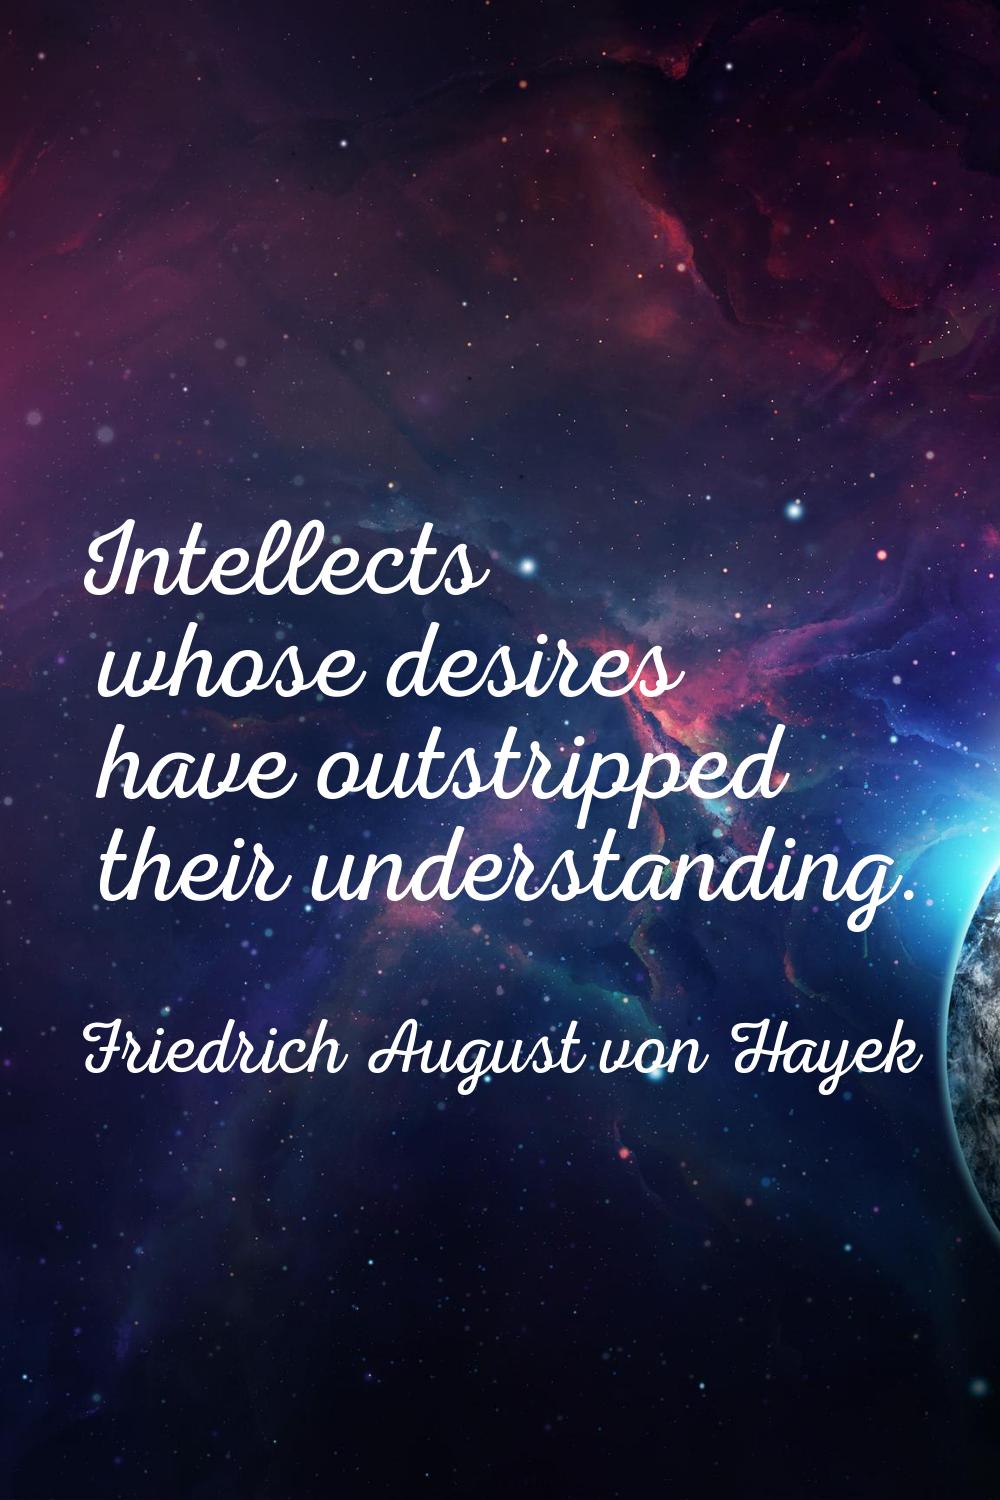 Intellects whose desires have outstripped their understanding.